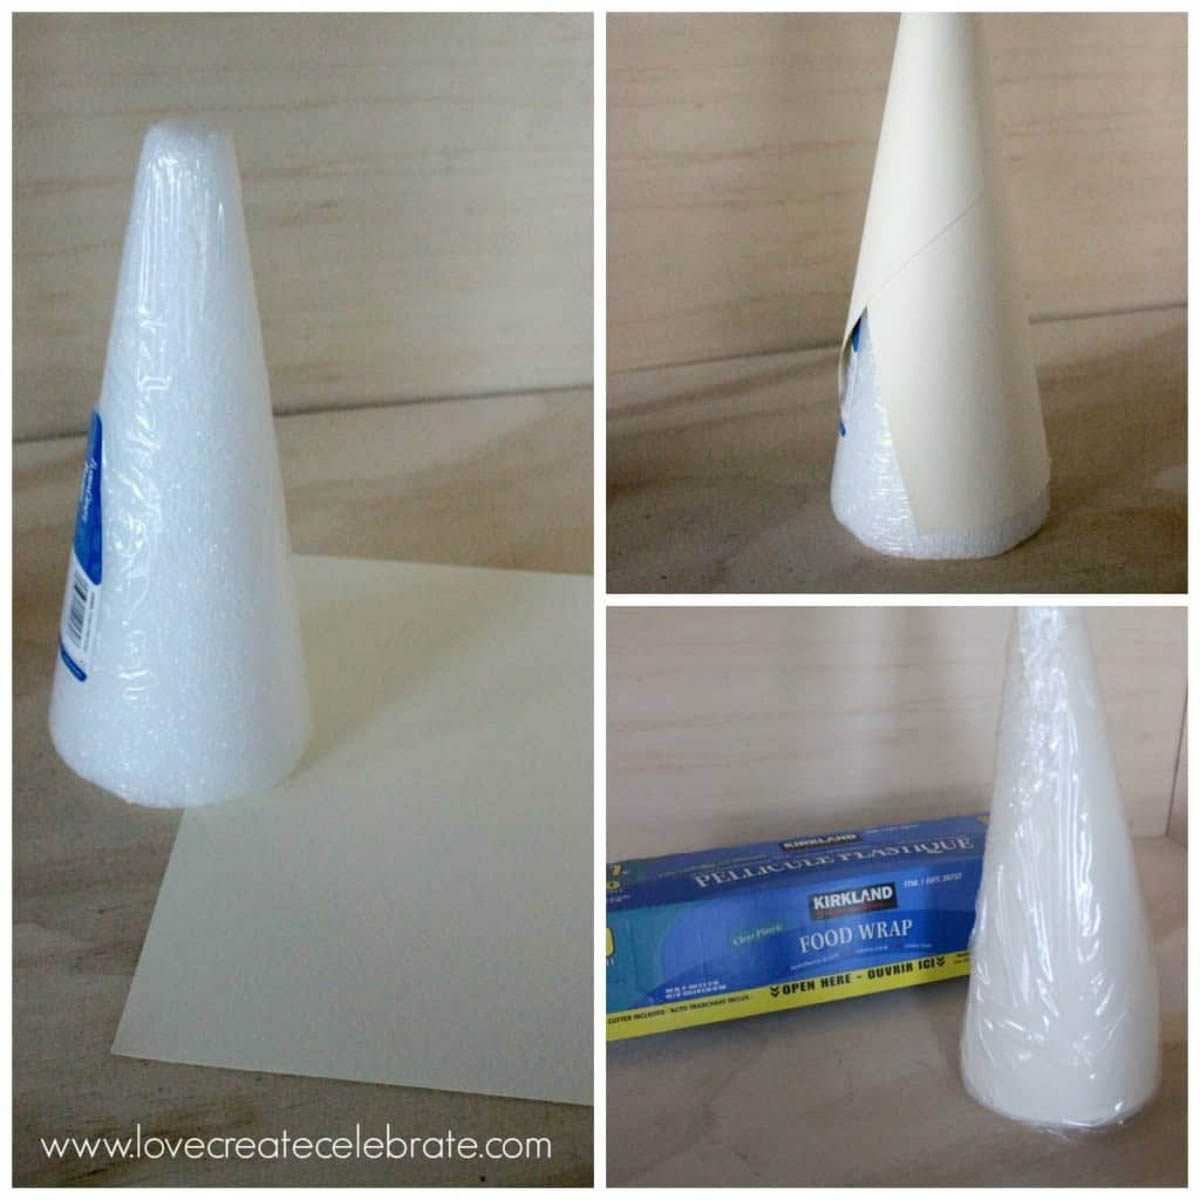 Image collage of foam cones wrapped in plastic